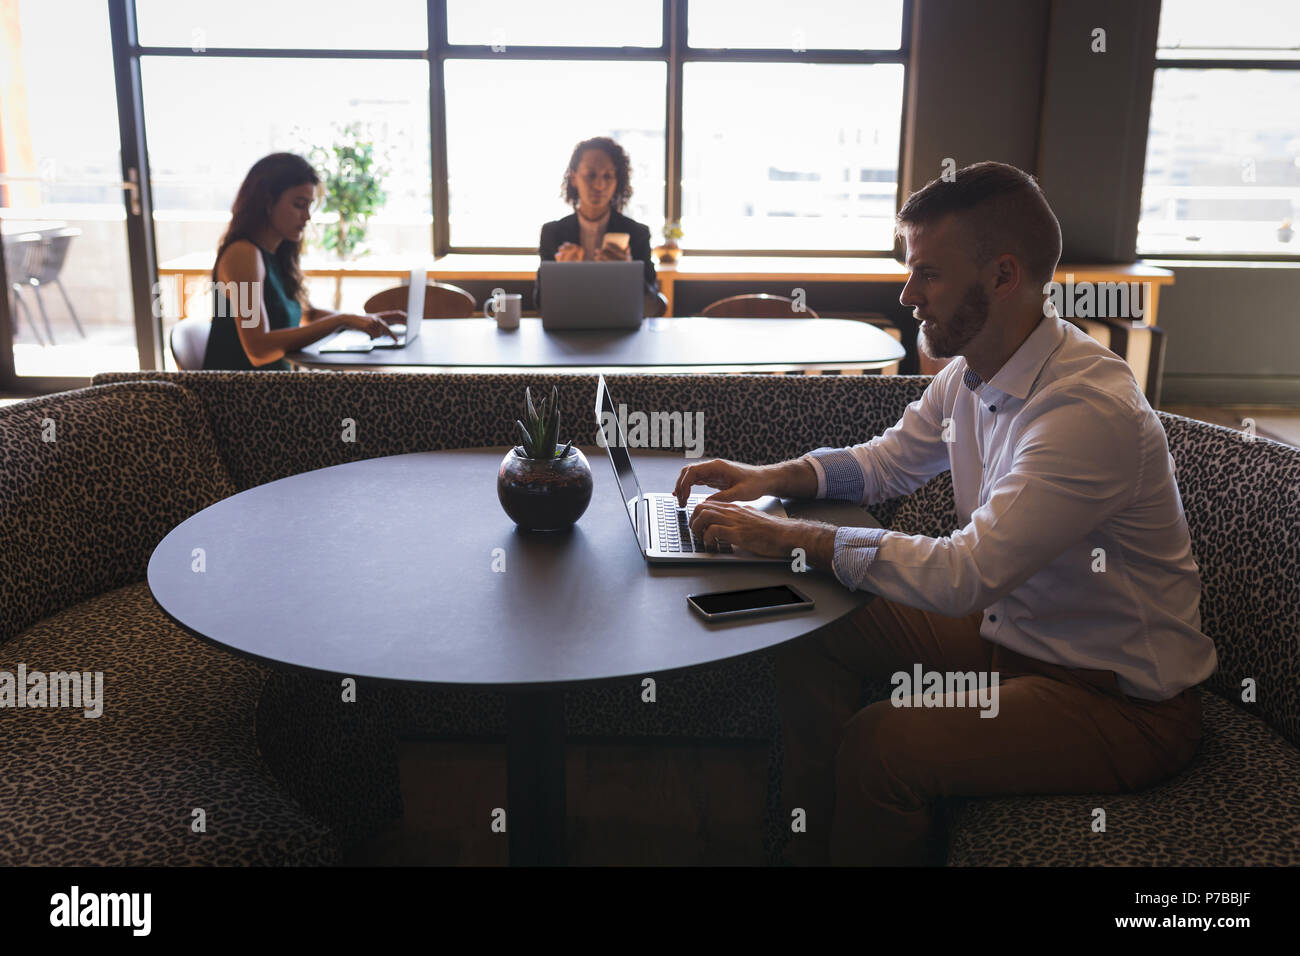 Business executives sitting and working on laptop in cafeteria Stock Photo